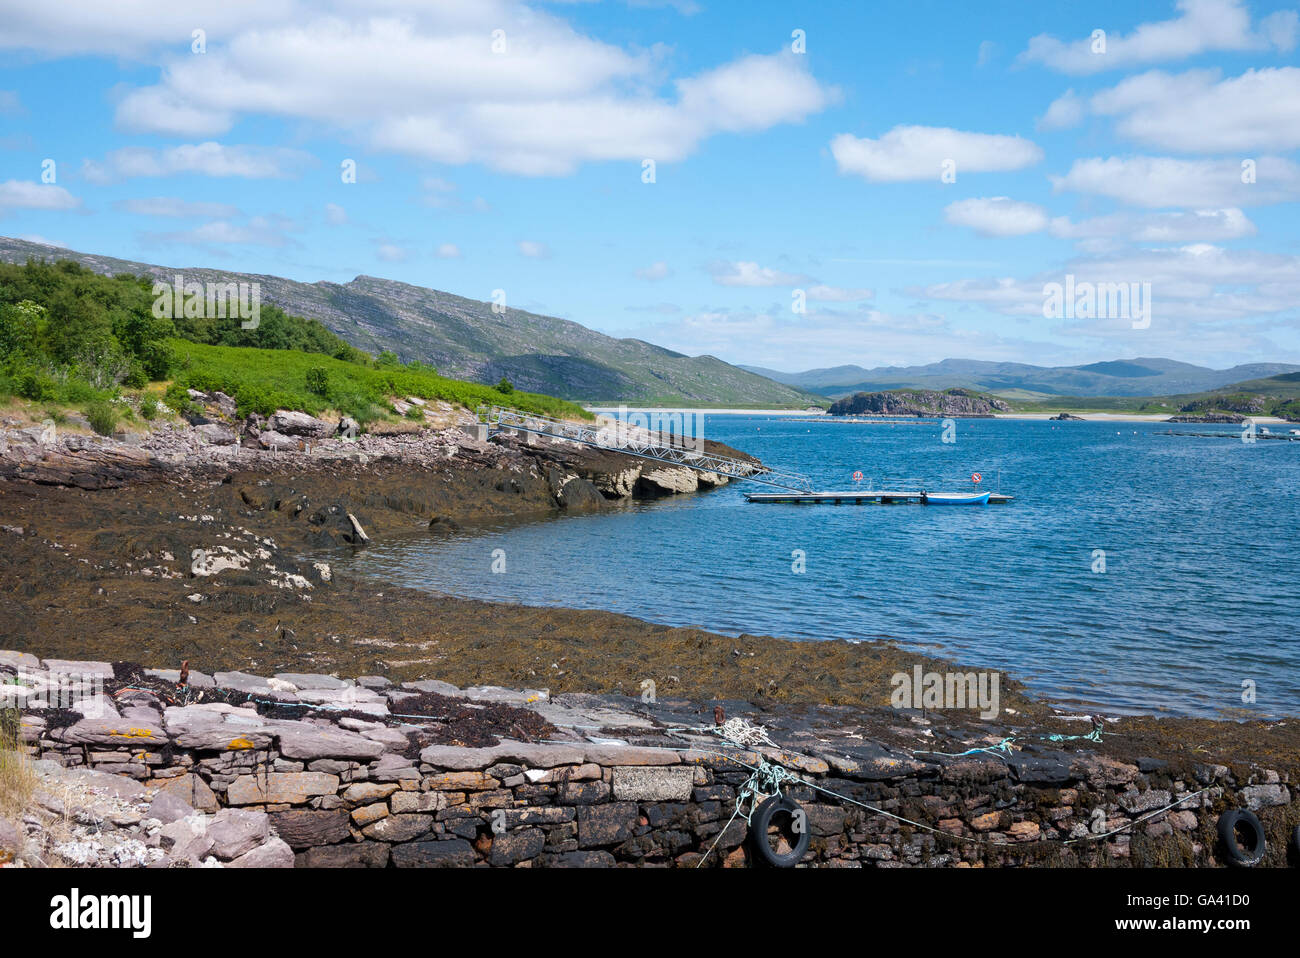 Looking across the Loch to the mainland from Isle Martin, Loch Kanaird, Highlands, Scotland, UK. Stock Photo